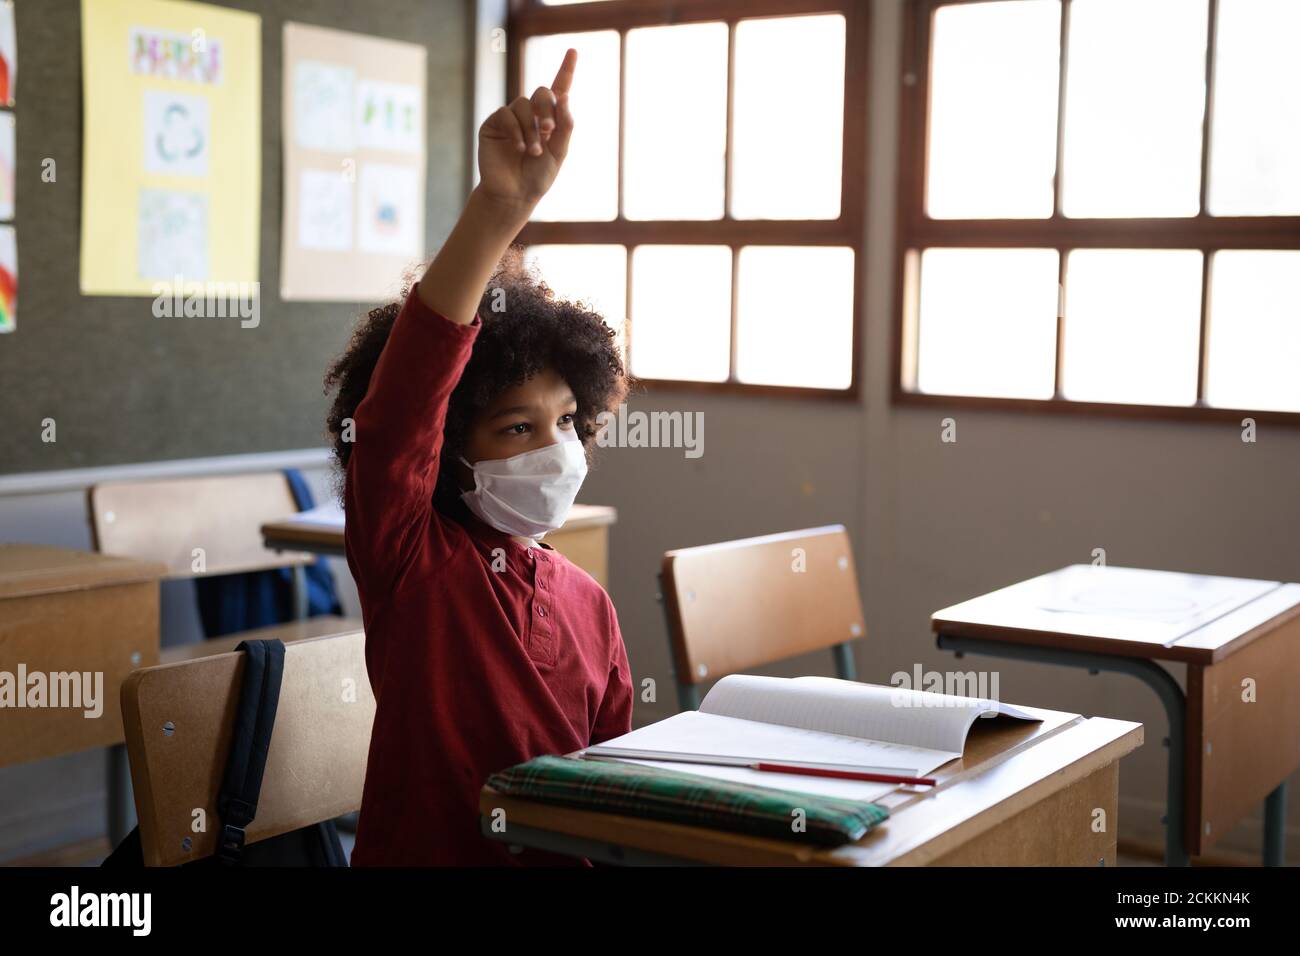 Boy raising his hand in the class at school Stock Photo